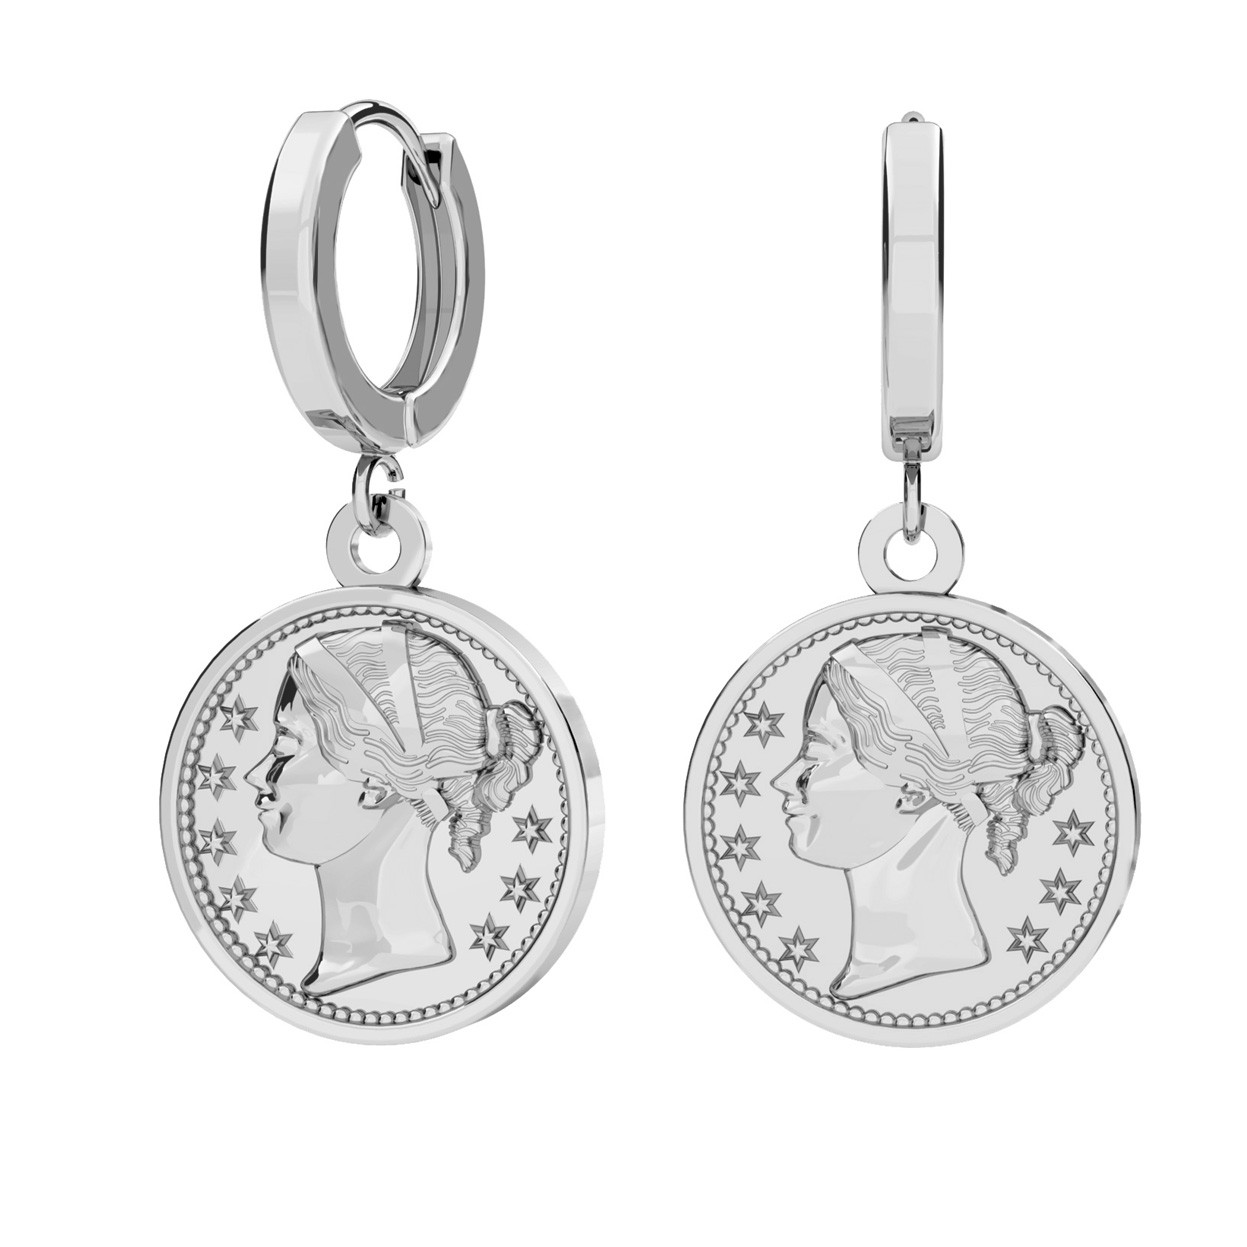 Coins earring, sterling silver 925